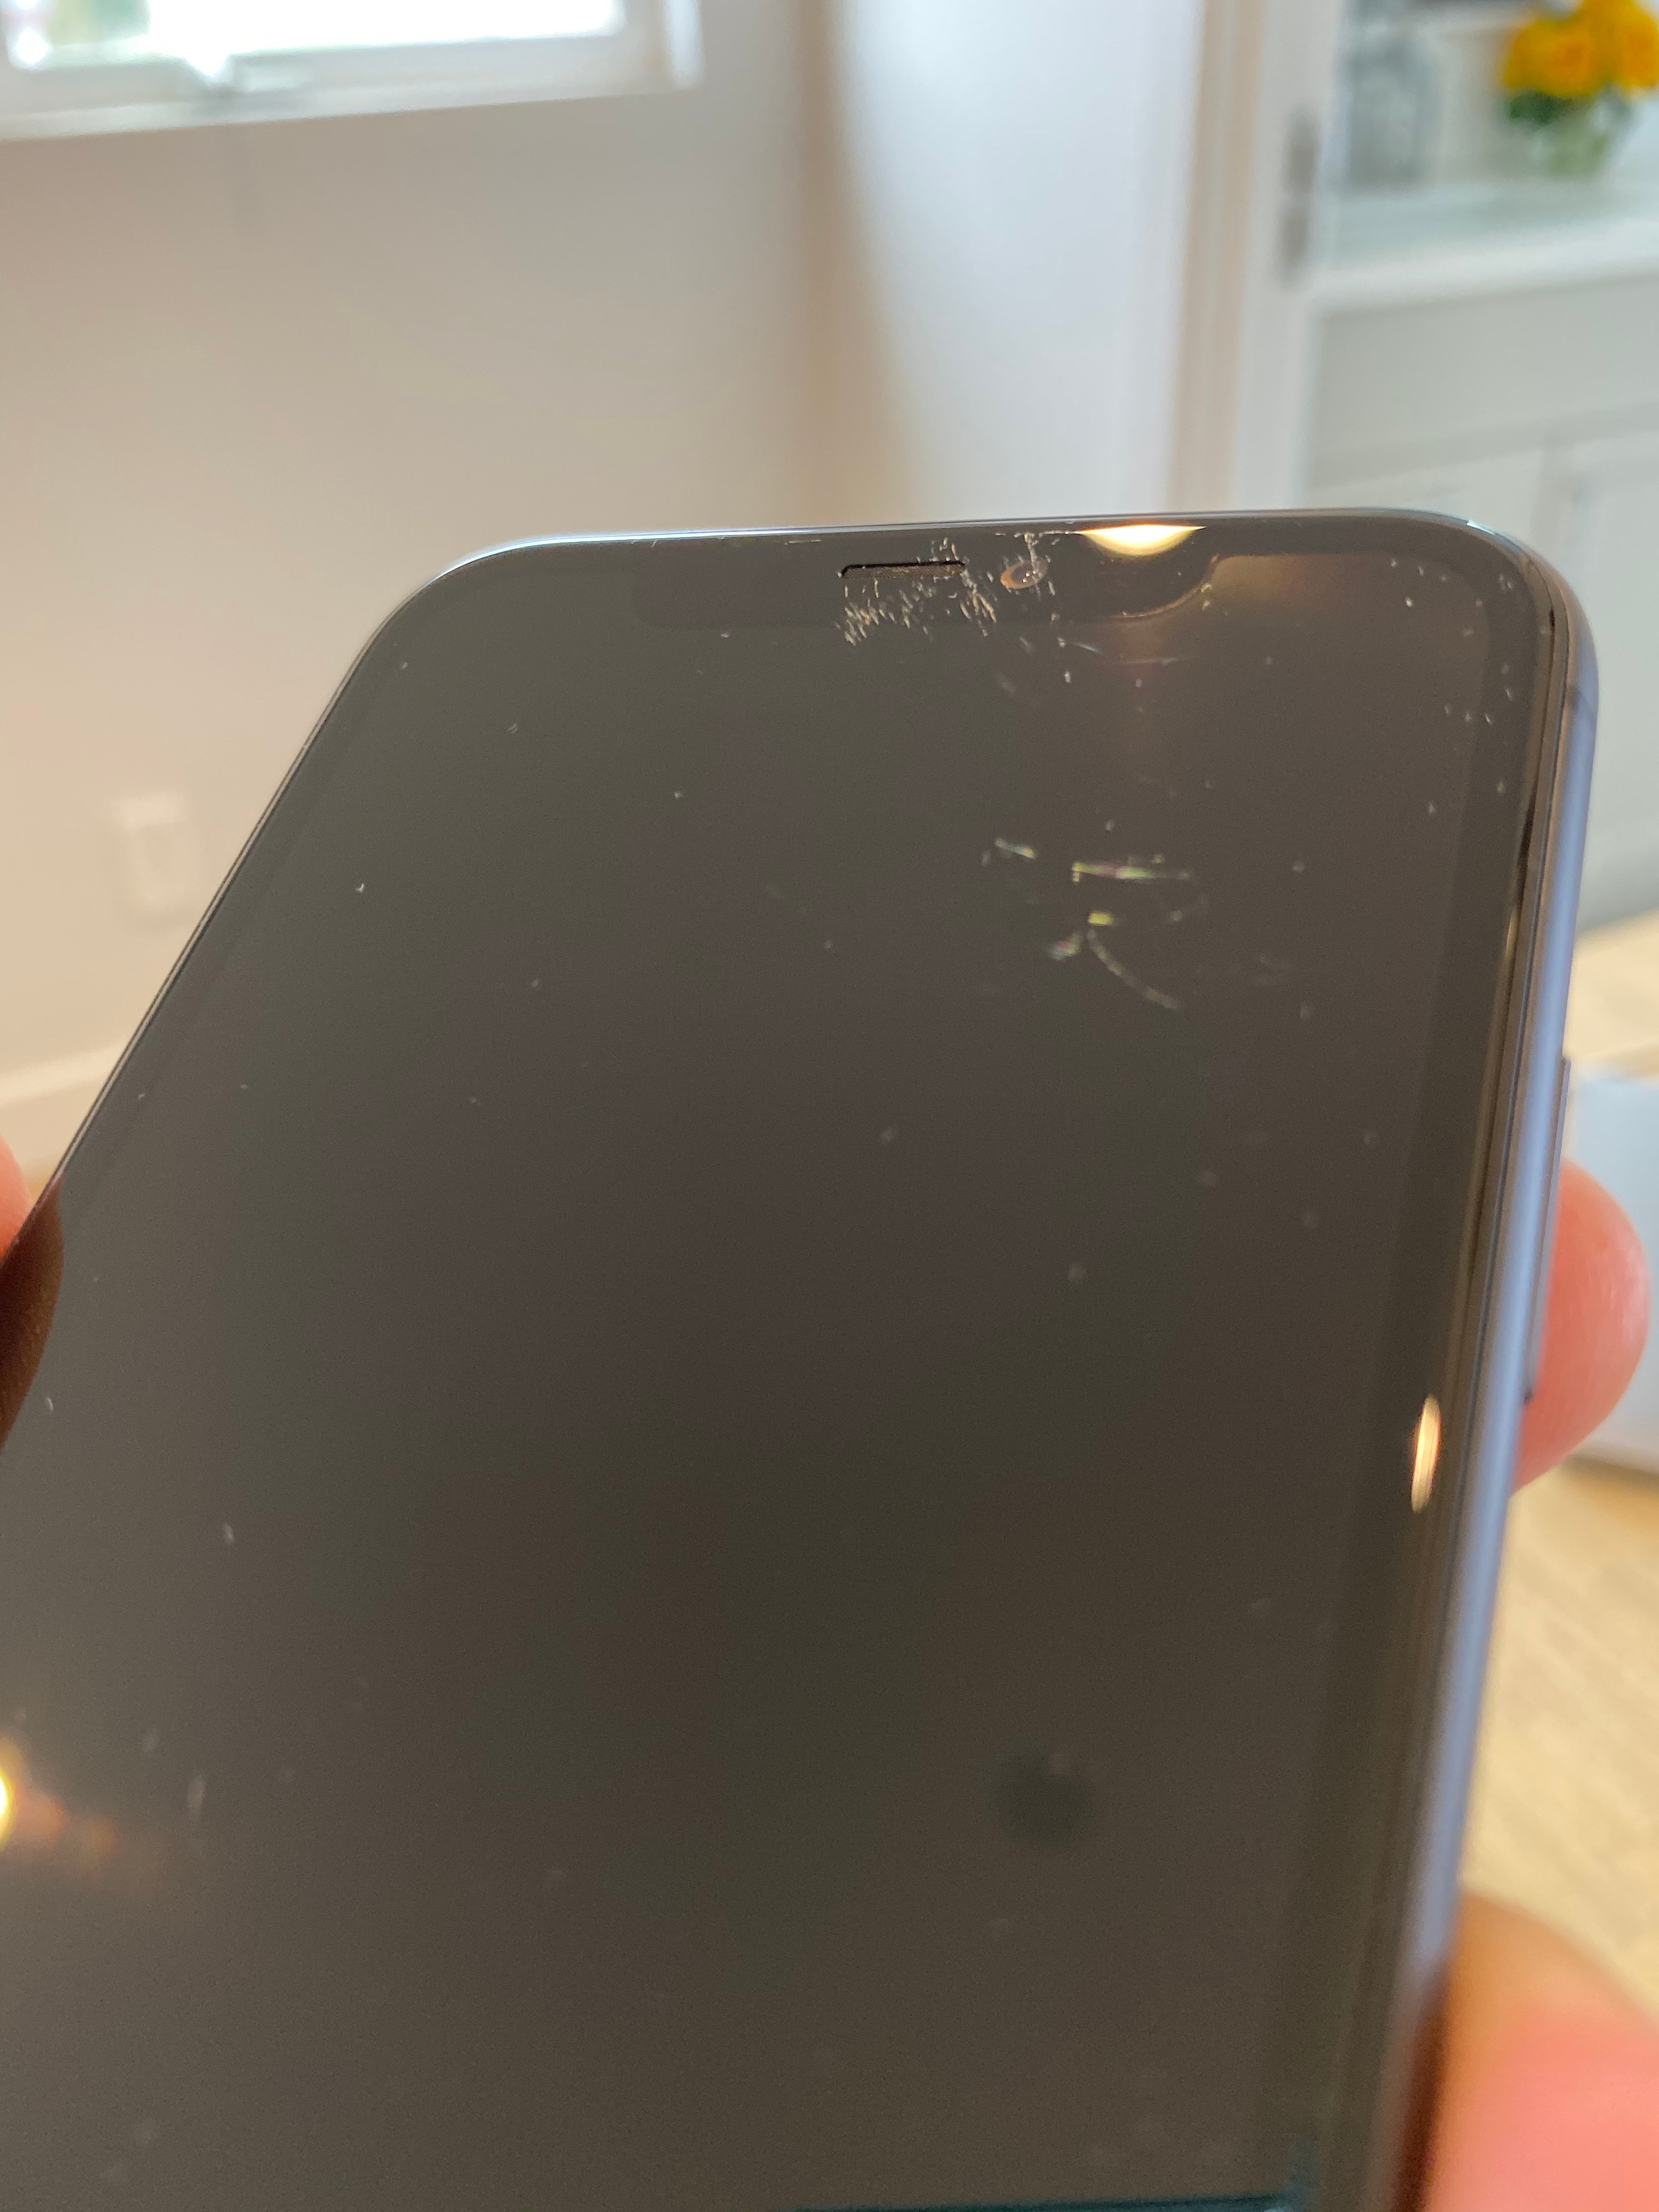 Does iPhone get scratches?